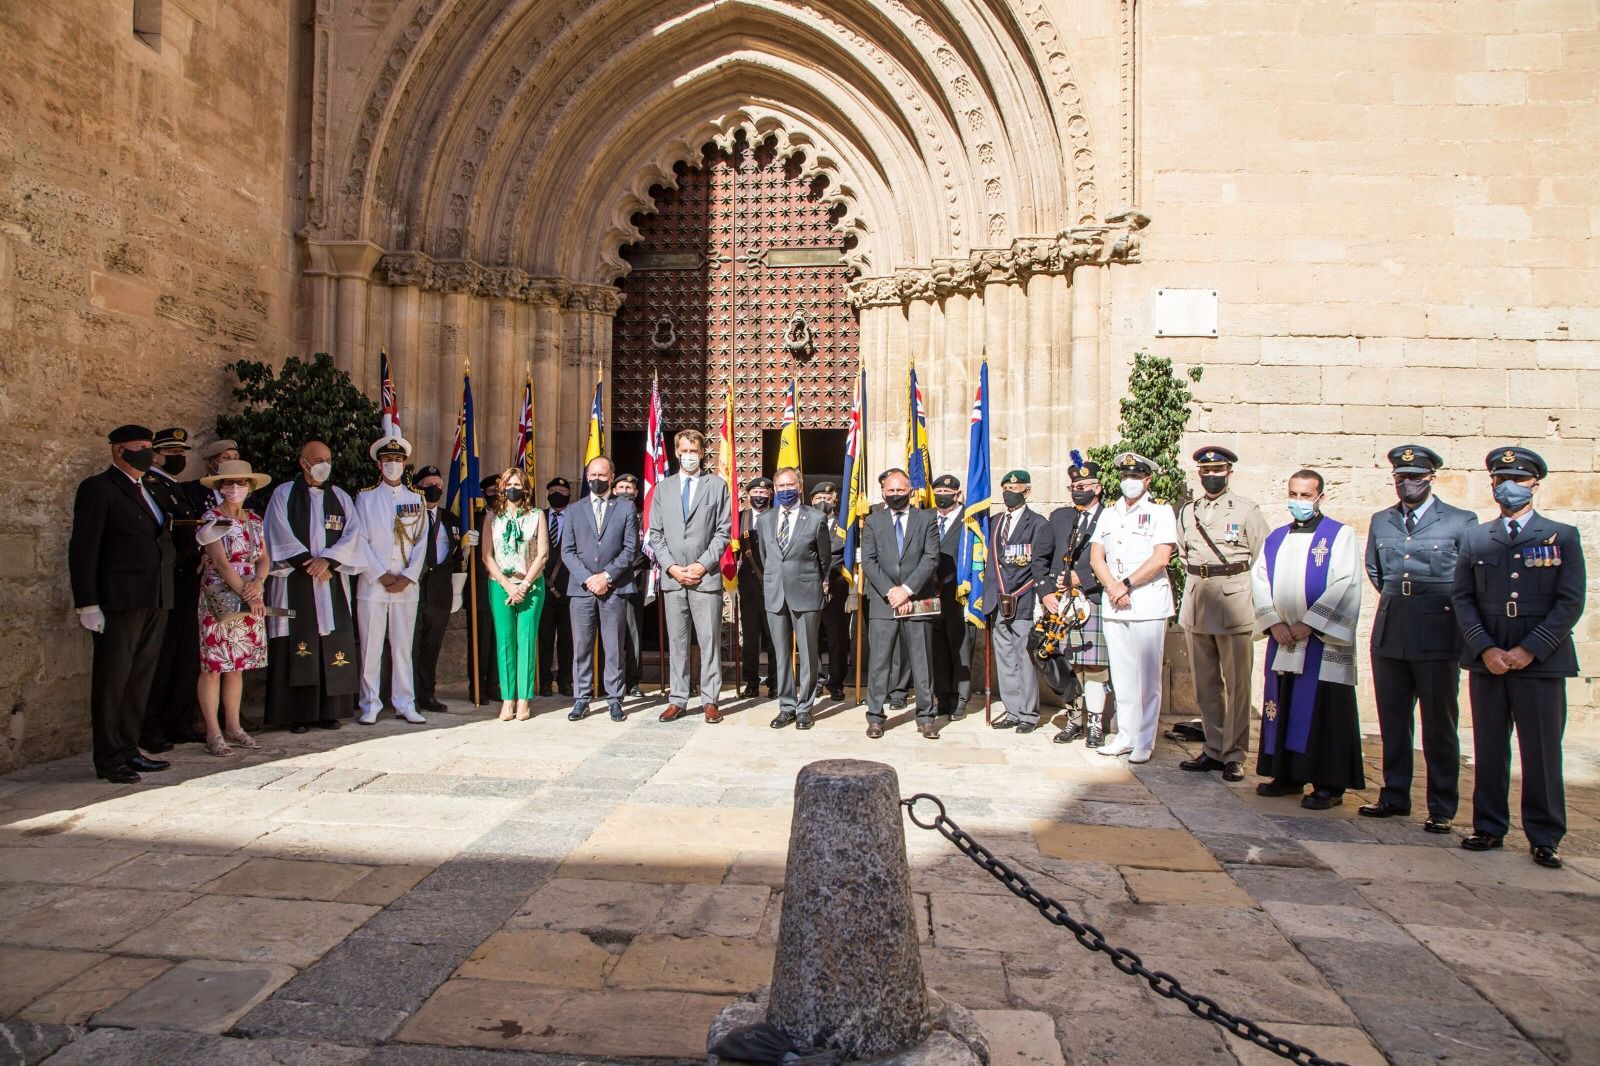 Legion celebrates it’s special day in Orihuela Cathedral